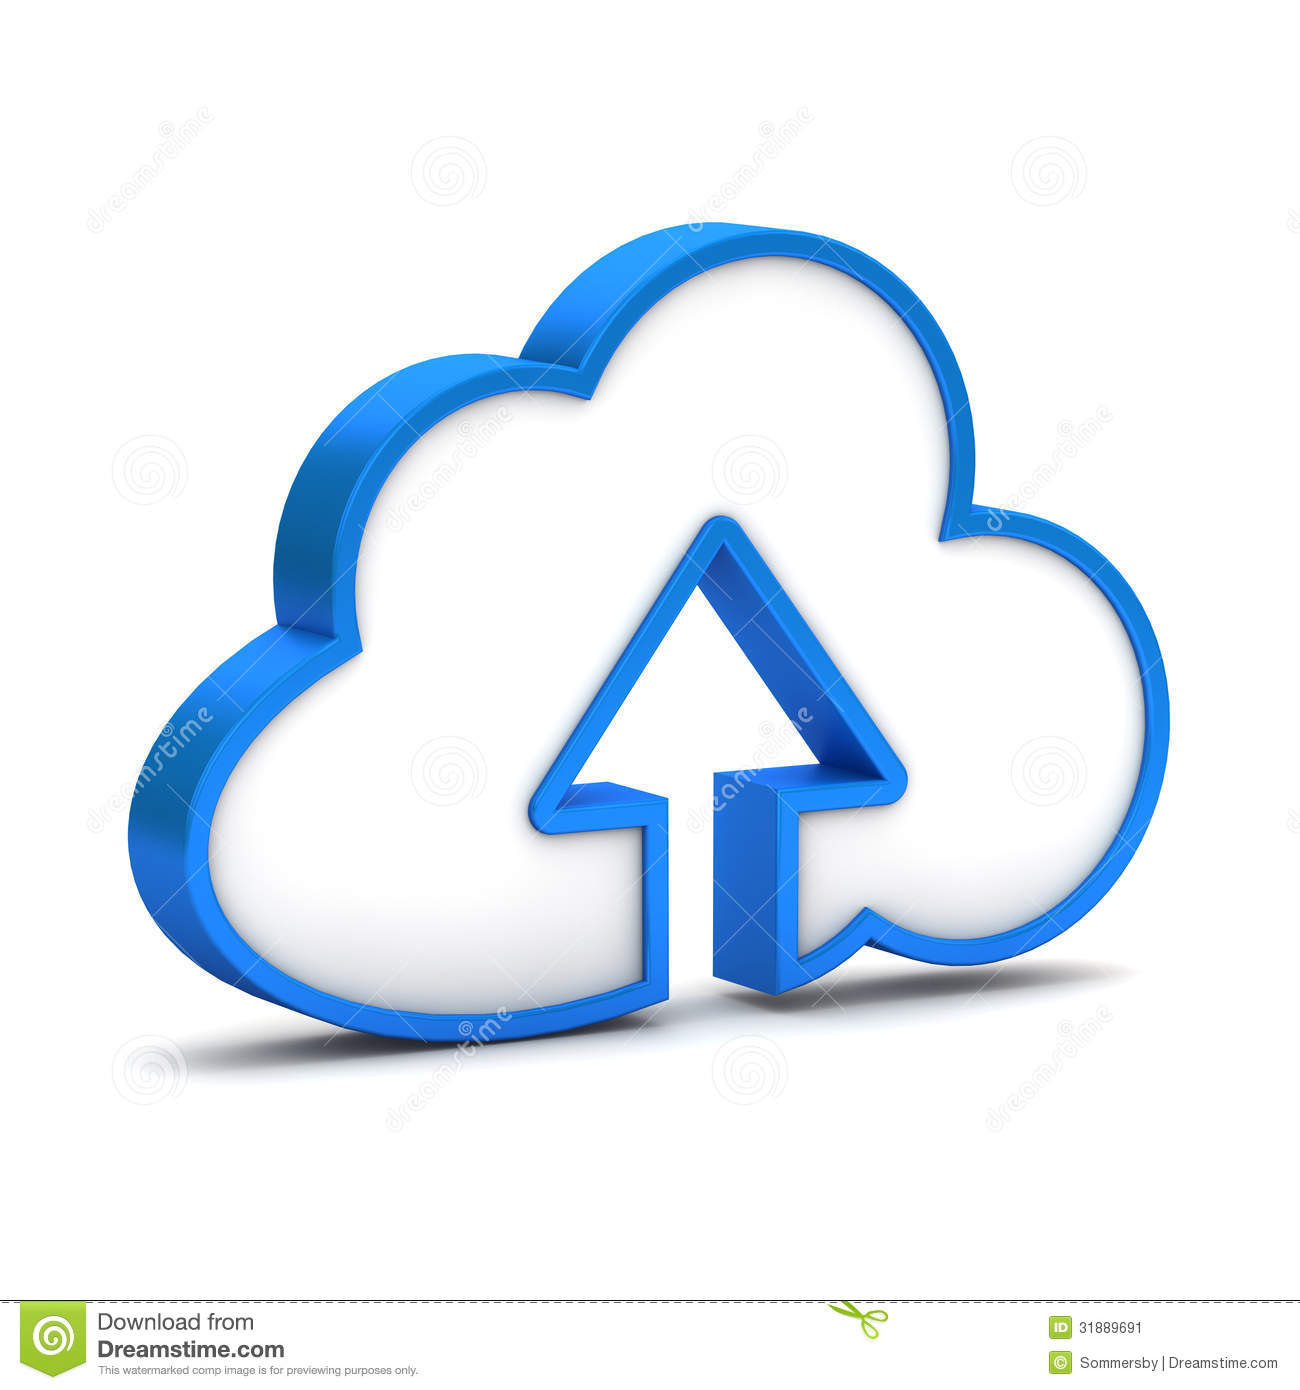 Cloud with Arrow Icon